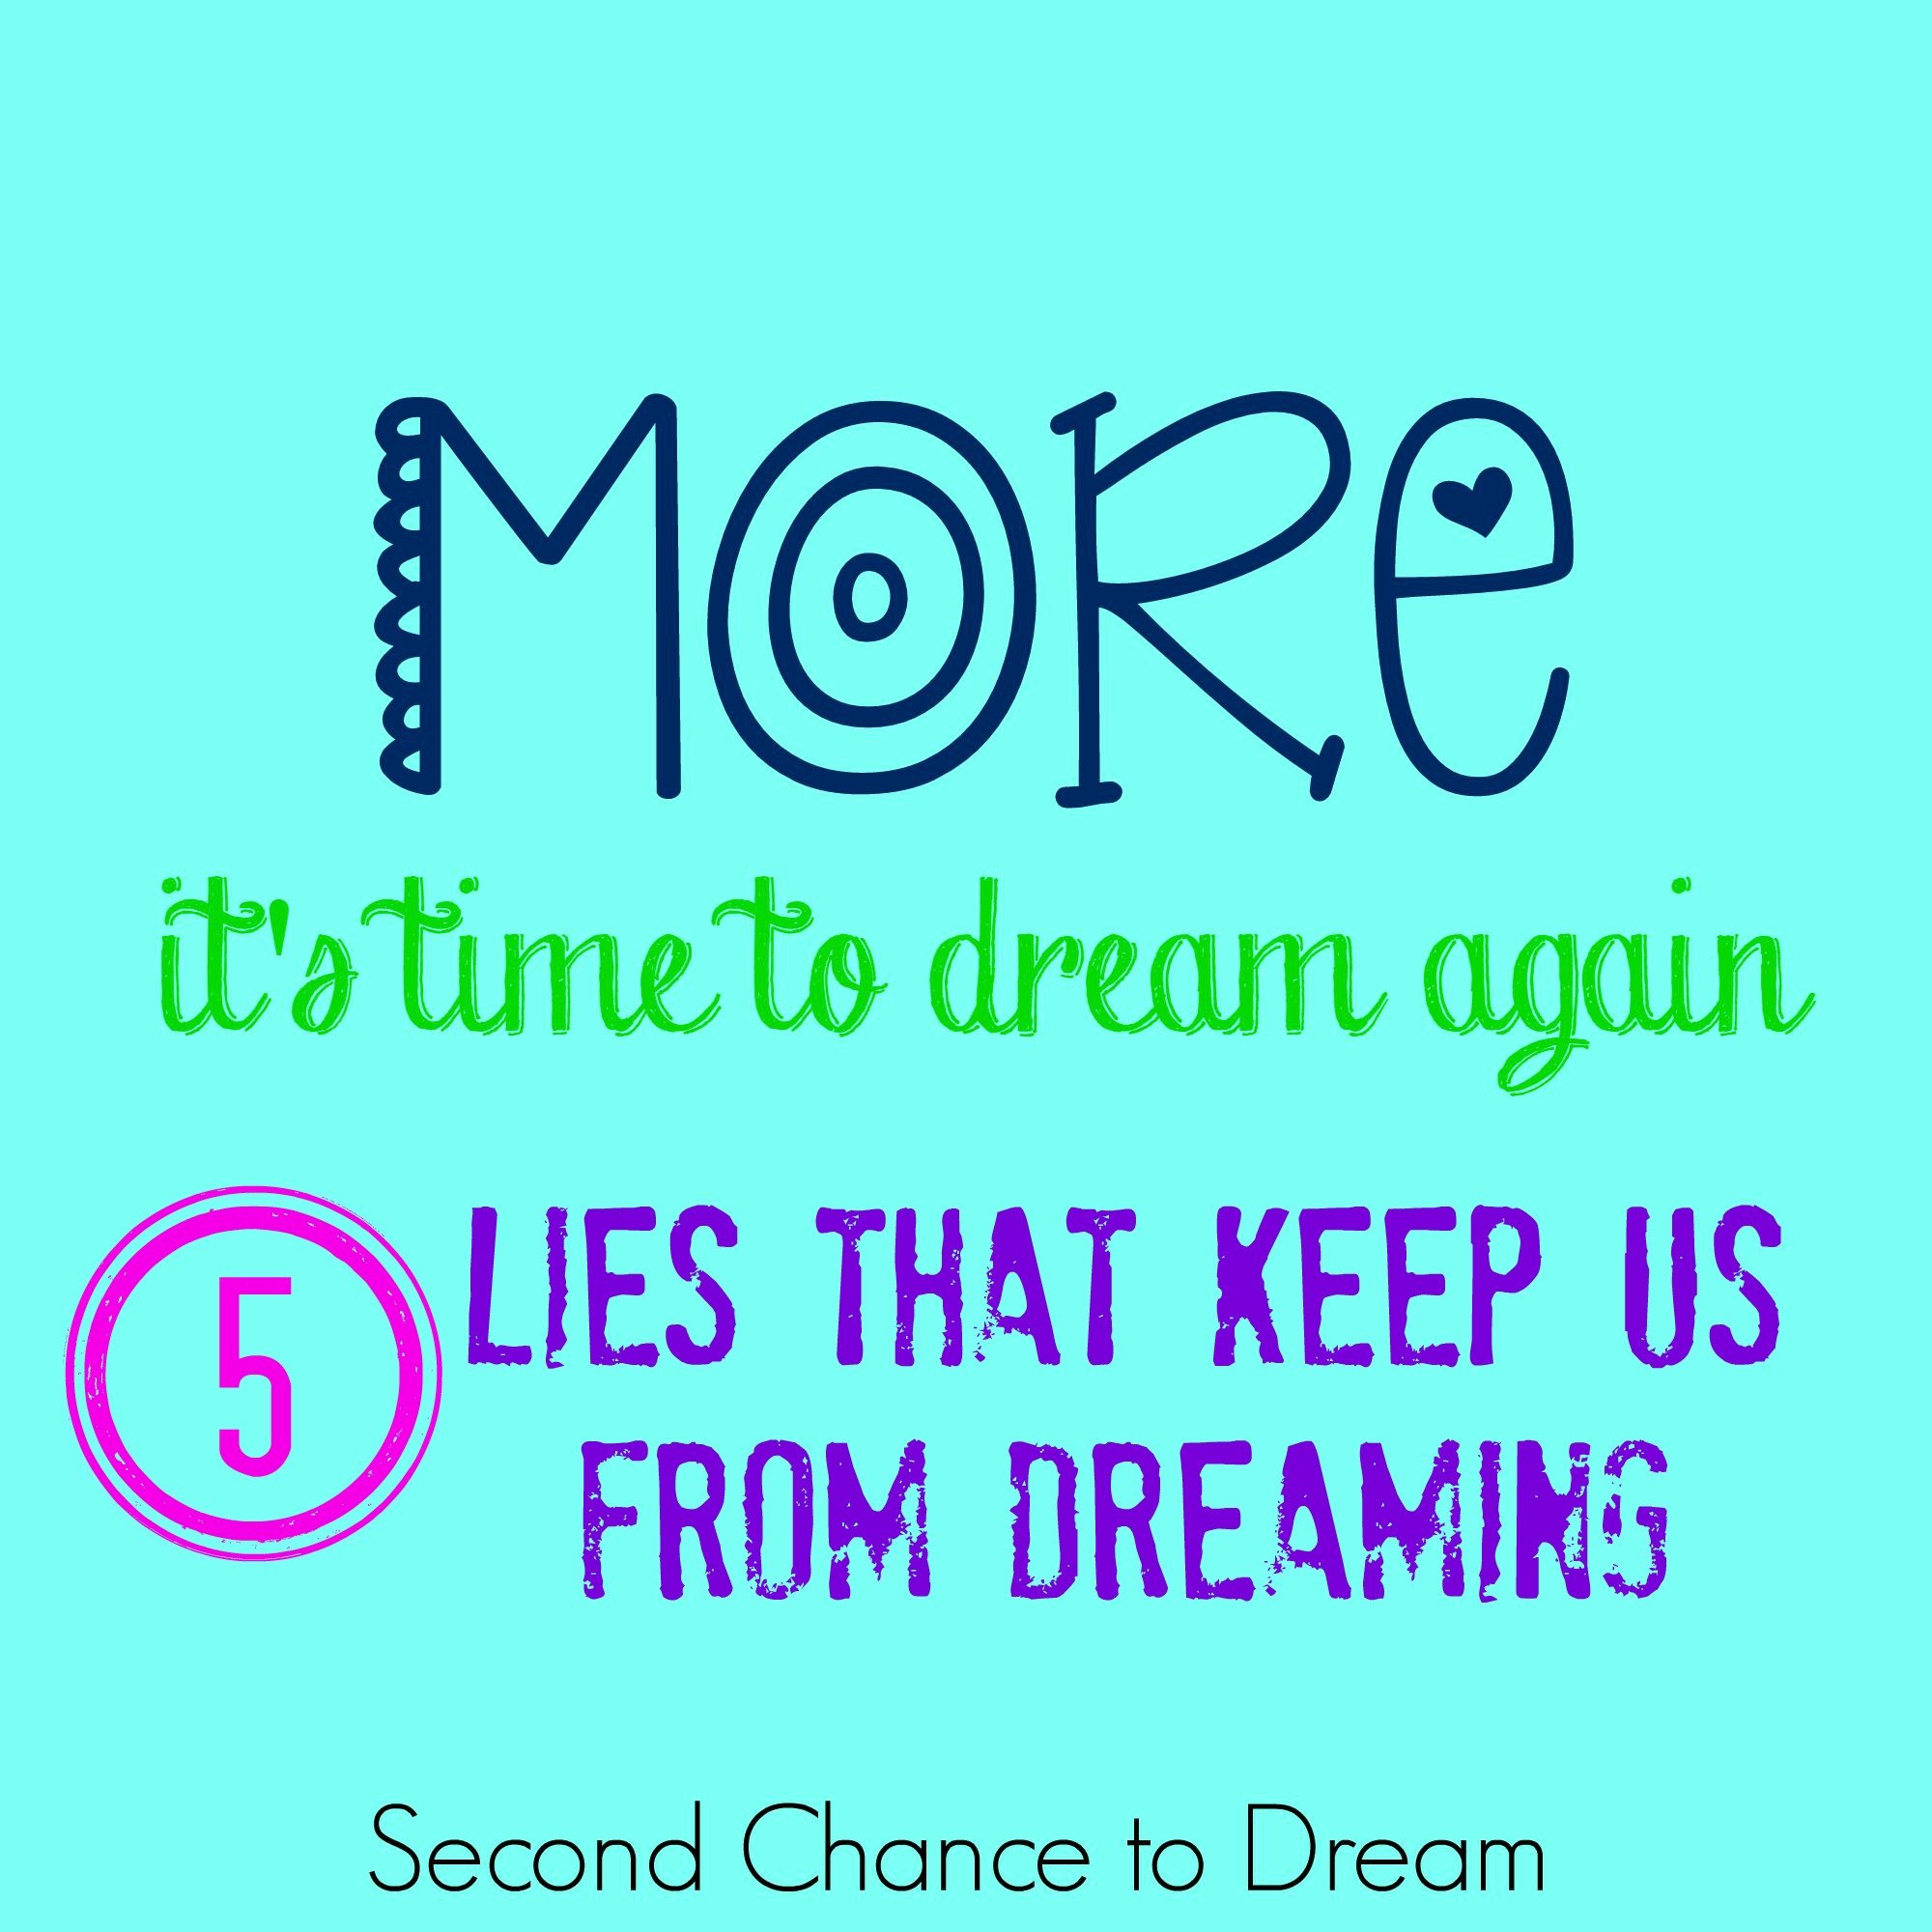 Second Chance to Dream: 5 Lies that keep us from dreaming